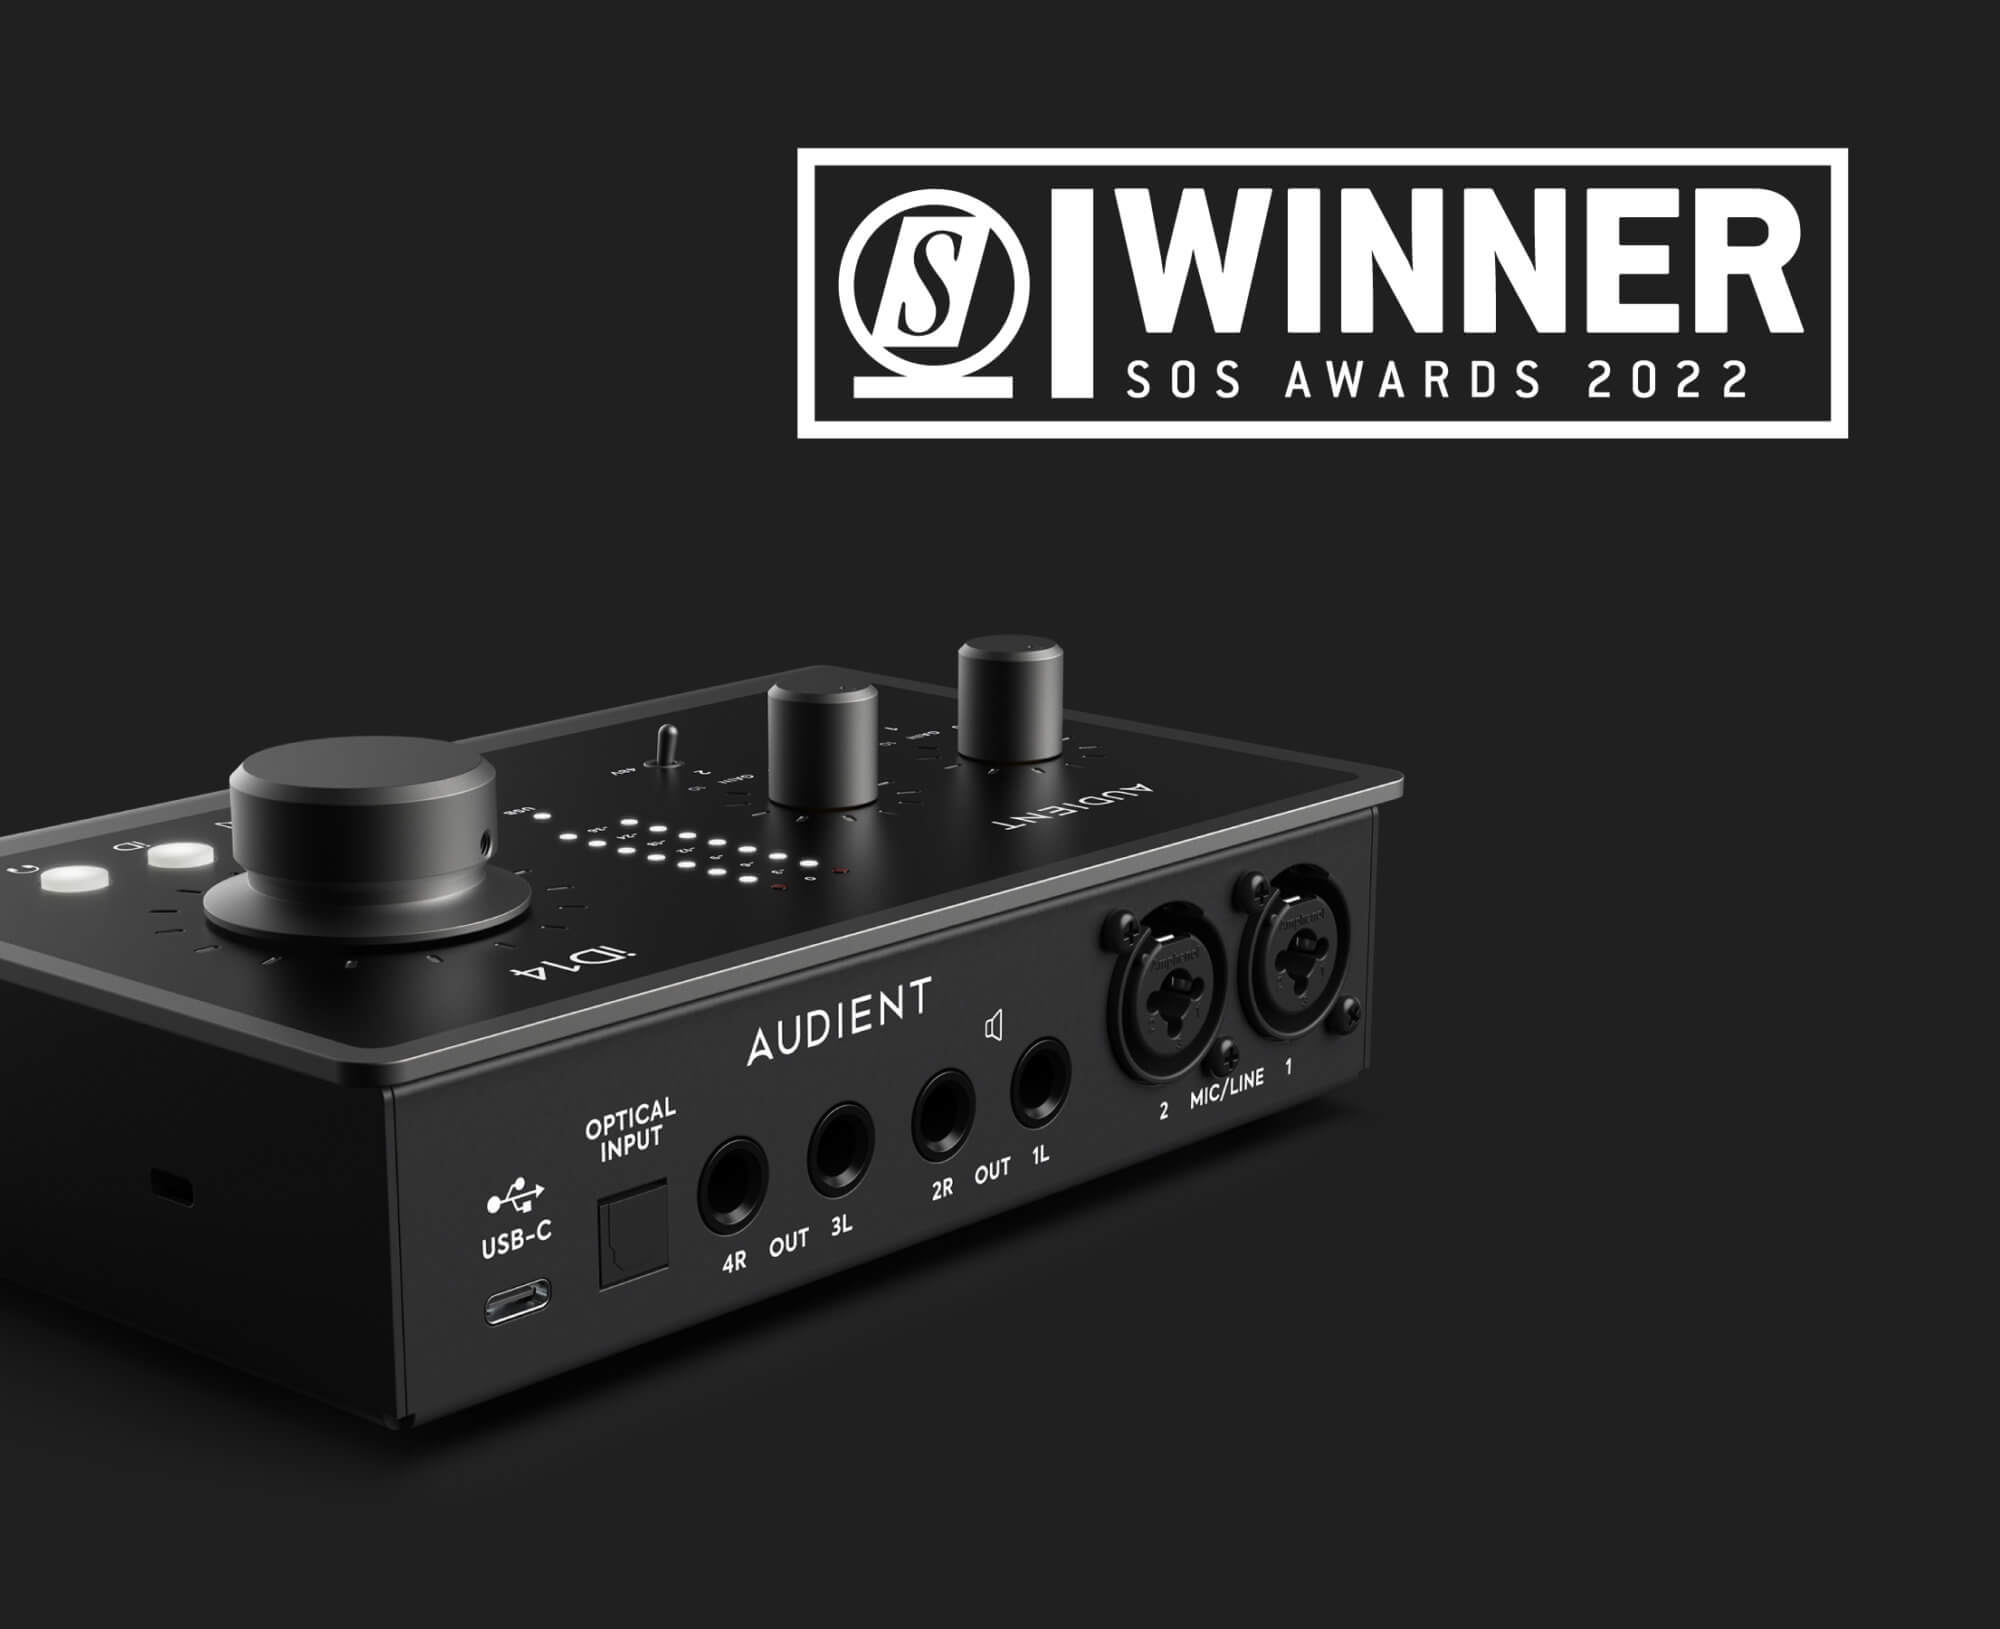 Audient iD14 (MKII) audio interface with SOS Award WINNER badge